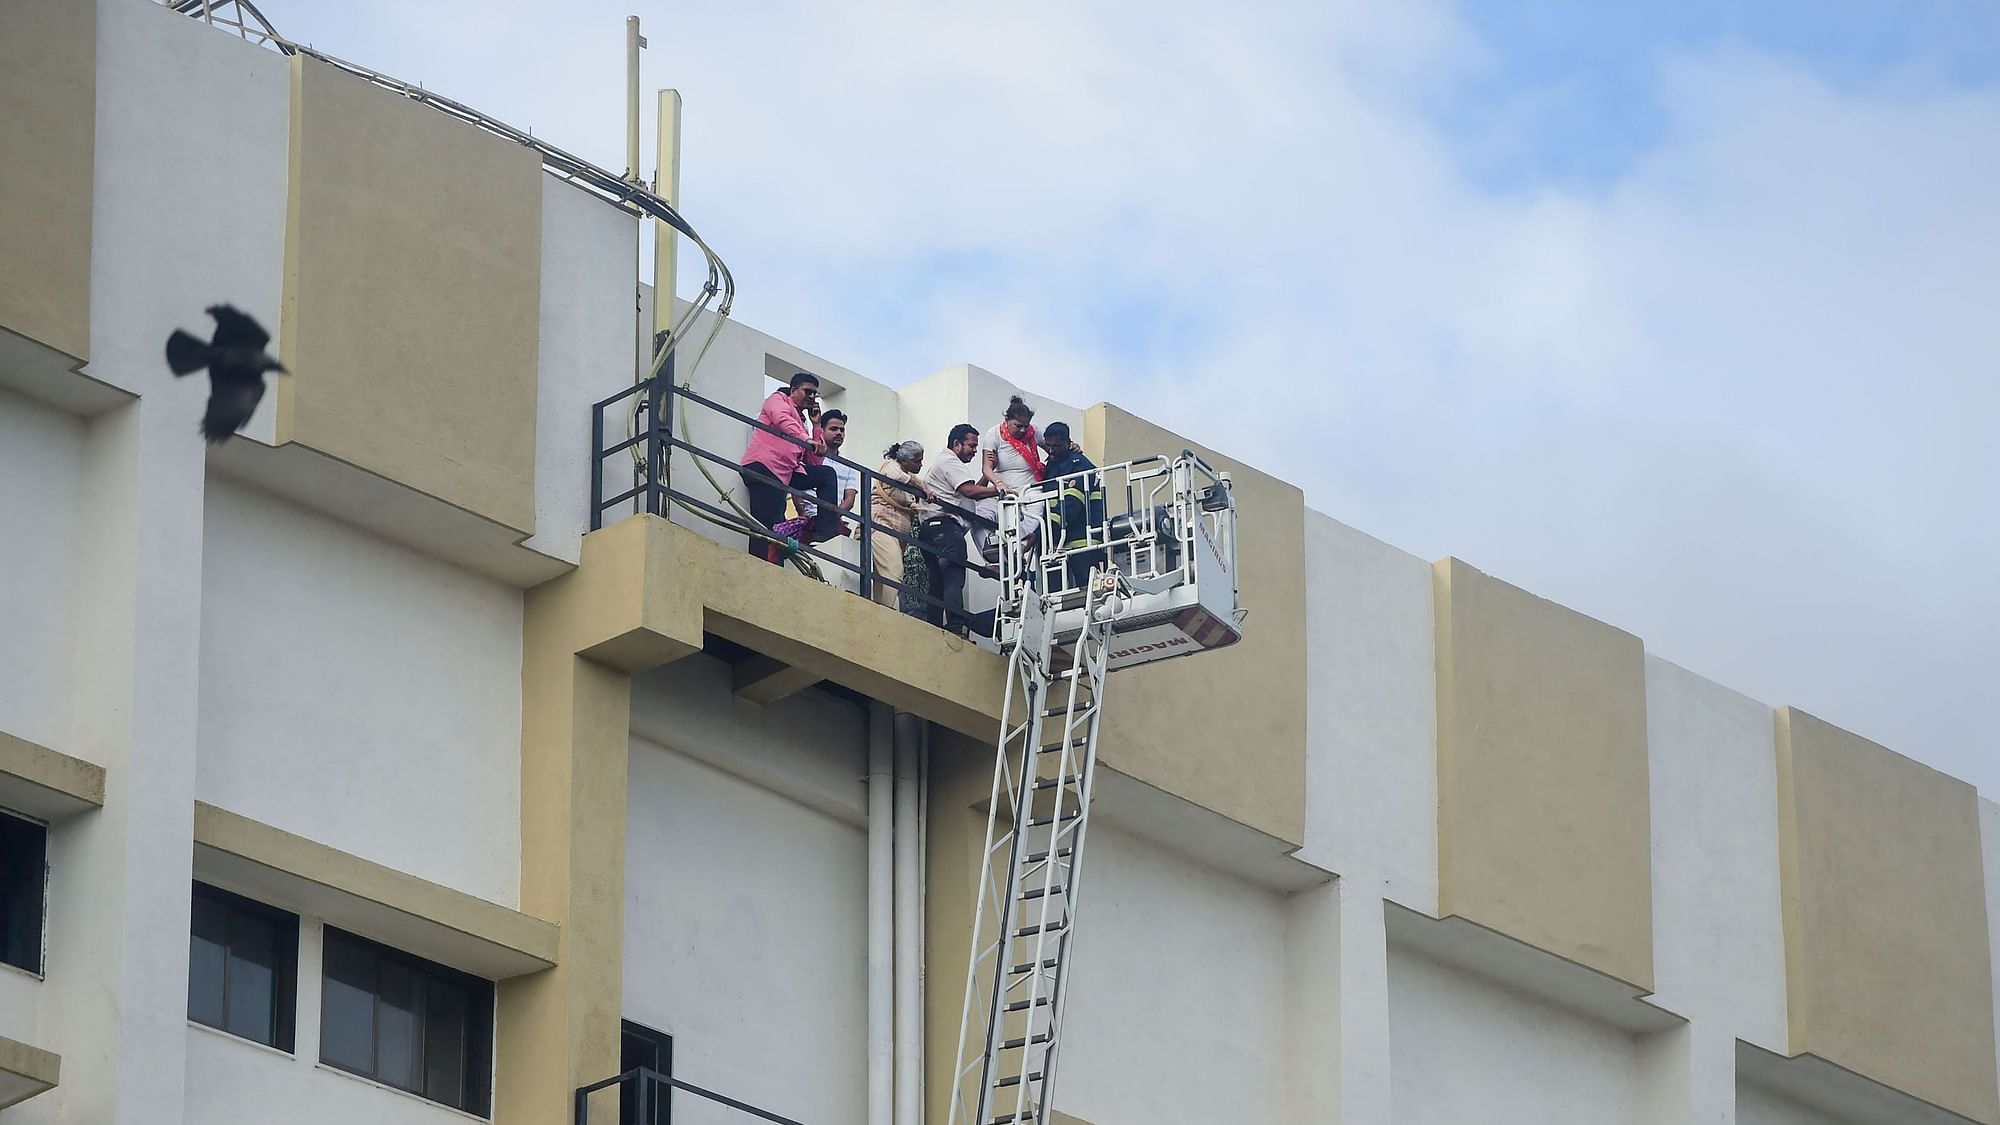 A level-four fire broke out at the MTNL exchange building in Mumbai’s suburban Bandra in the afternoon of Monday, 22 July.